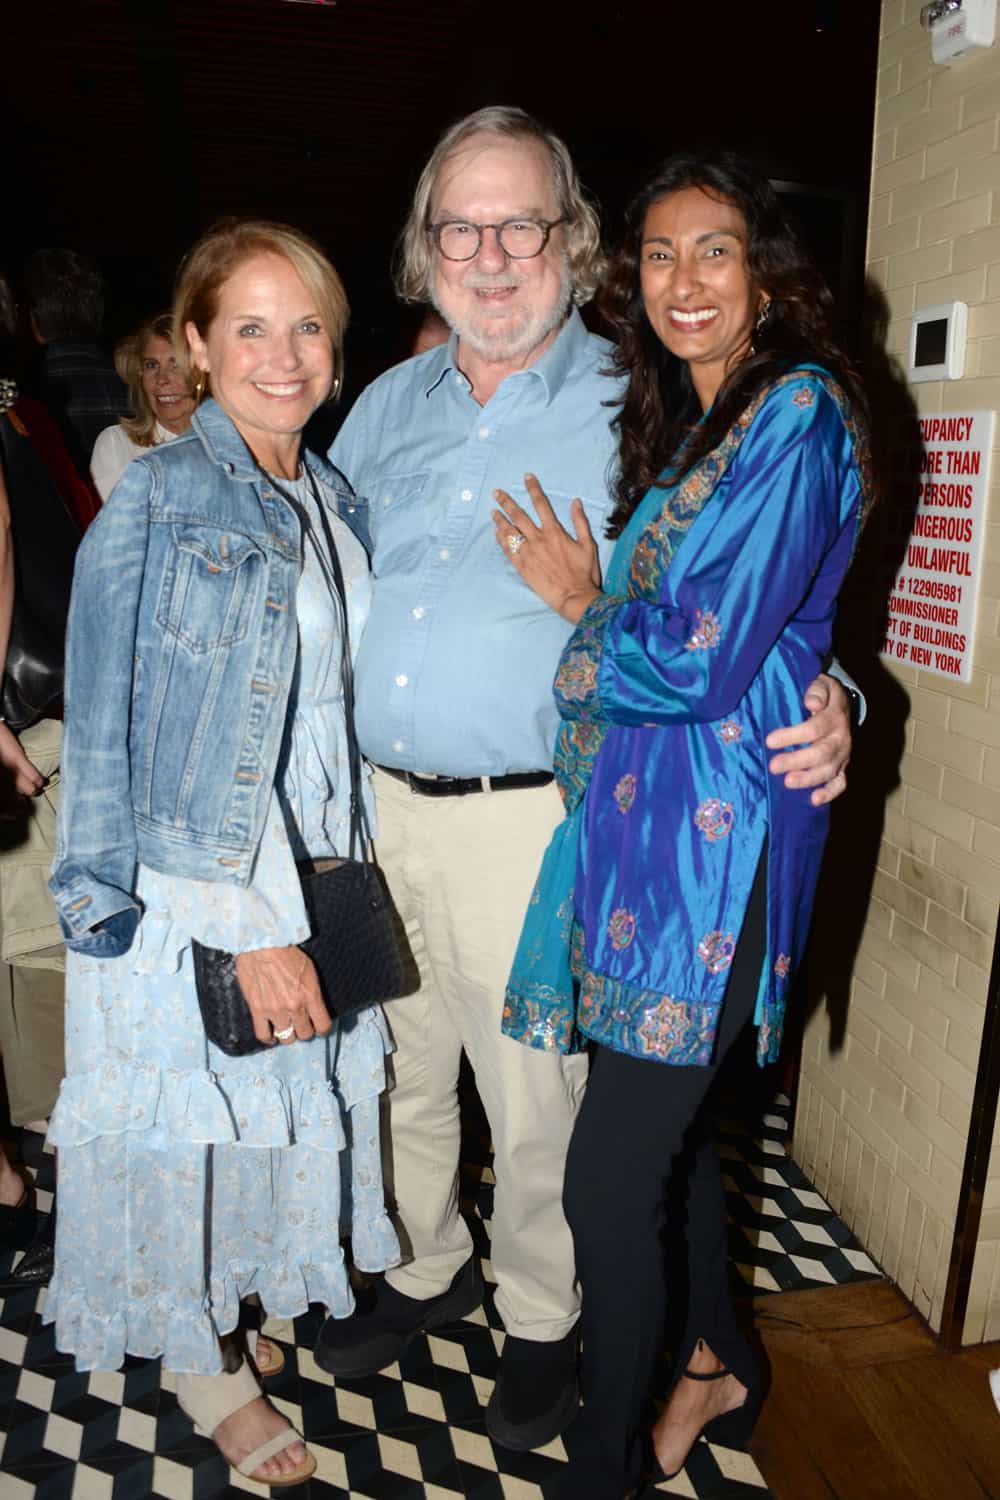 Advocate Katie COuric, Dr. Jim Allison, and Dr. Padmanee Sharma at a reception for "Jim Allison: Breakthrough" hosted by Dada Films with The Cinema Society in New York City. Photo by Paul Bruinooge/PMC. Courtesy of Uncommon Productions.